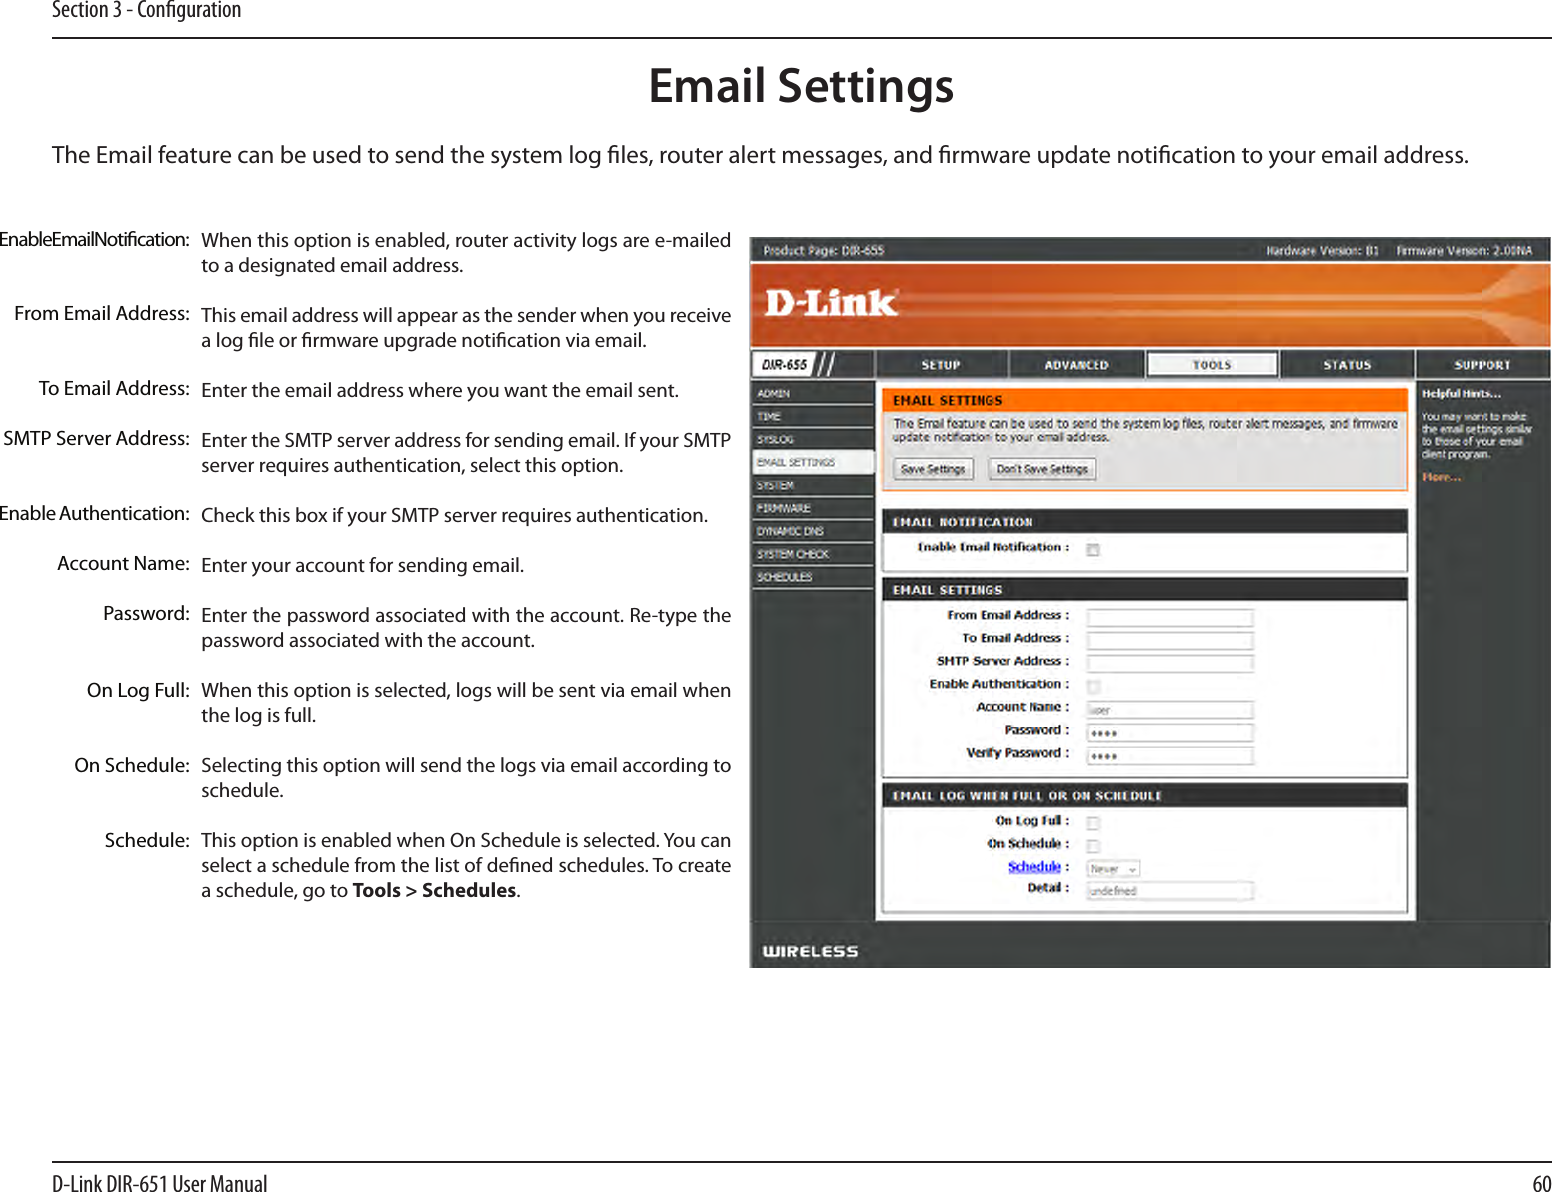 60D-Link DIR-651 User ManualSection 3 - CongurationEmail SettingsThe Email feature can be used to send the system log les, router alert messages, and rmware update notication to your email address. Enable Email Notication: From Email Address:To Email Address:SMTP Server Address:Enable Authentication:Account Name:Password:On Log Full:On Schedule:Schedule:When this option is enabled, router activity logs are e-mailed to a designated email address.This email address will appear as the sender when you receive a log le or rmware upgrade notication via email.Enter the email address where you want the email sent. Enter the SMTP server address for sending email. If your SMTP server requires authentication, select this option.Check this box if your SMTP server requires authentication. Enter your account for sending email.Enter the password associated with the account. Re-type the password associated with the account.When this option is selected, logs will be sent via email when the log is full.Selecting this option will send the logs via email according to schedule.This option is enabled when On Schedule is selected. You can select a schedule from the list of dened schedules. To create a schedule, go to Tools &gt; Schedules.